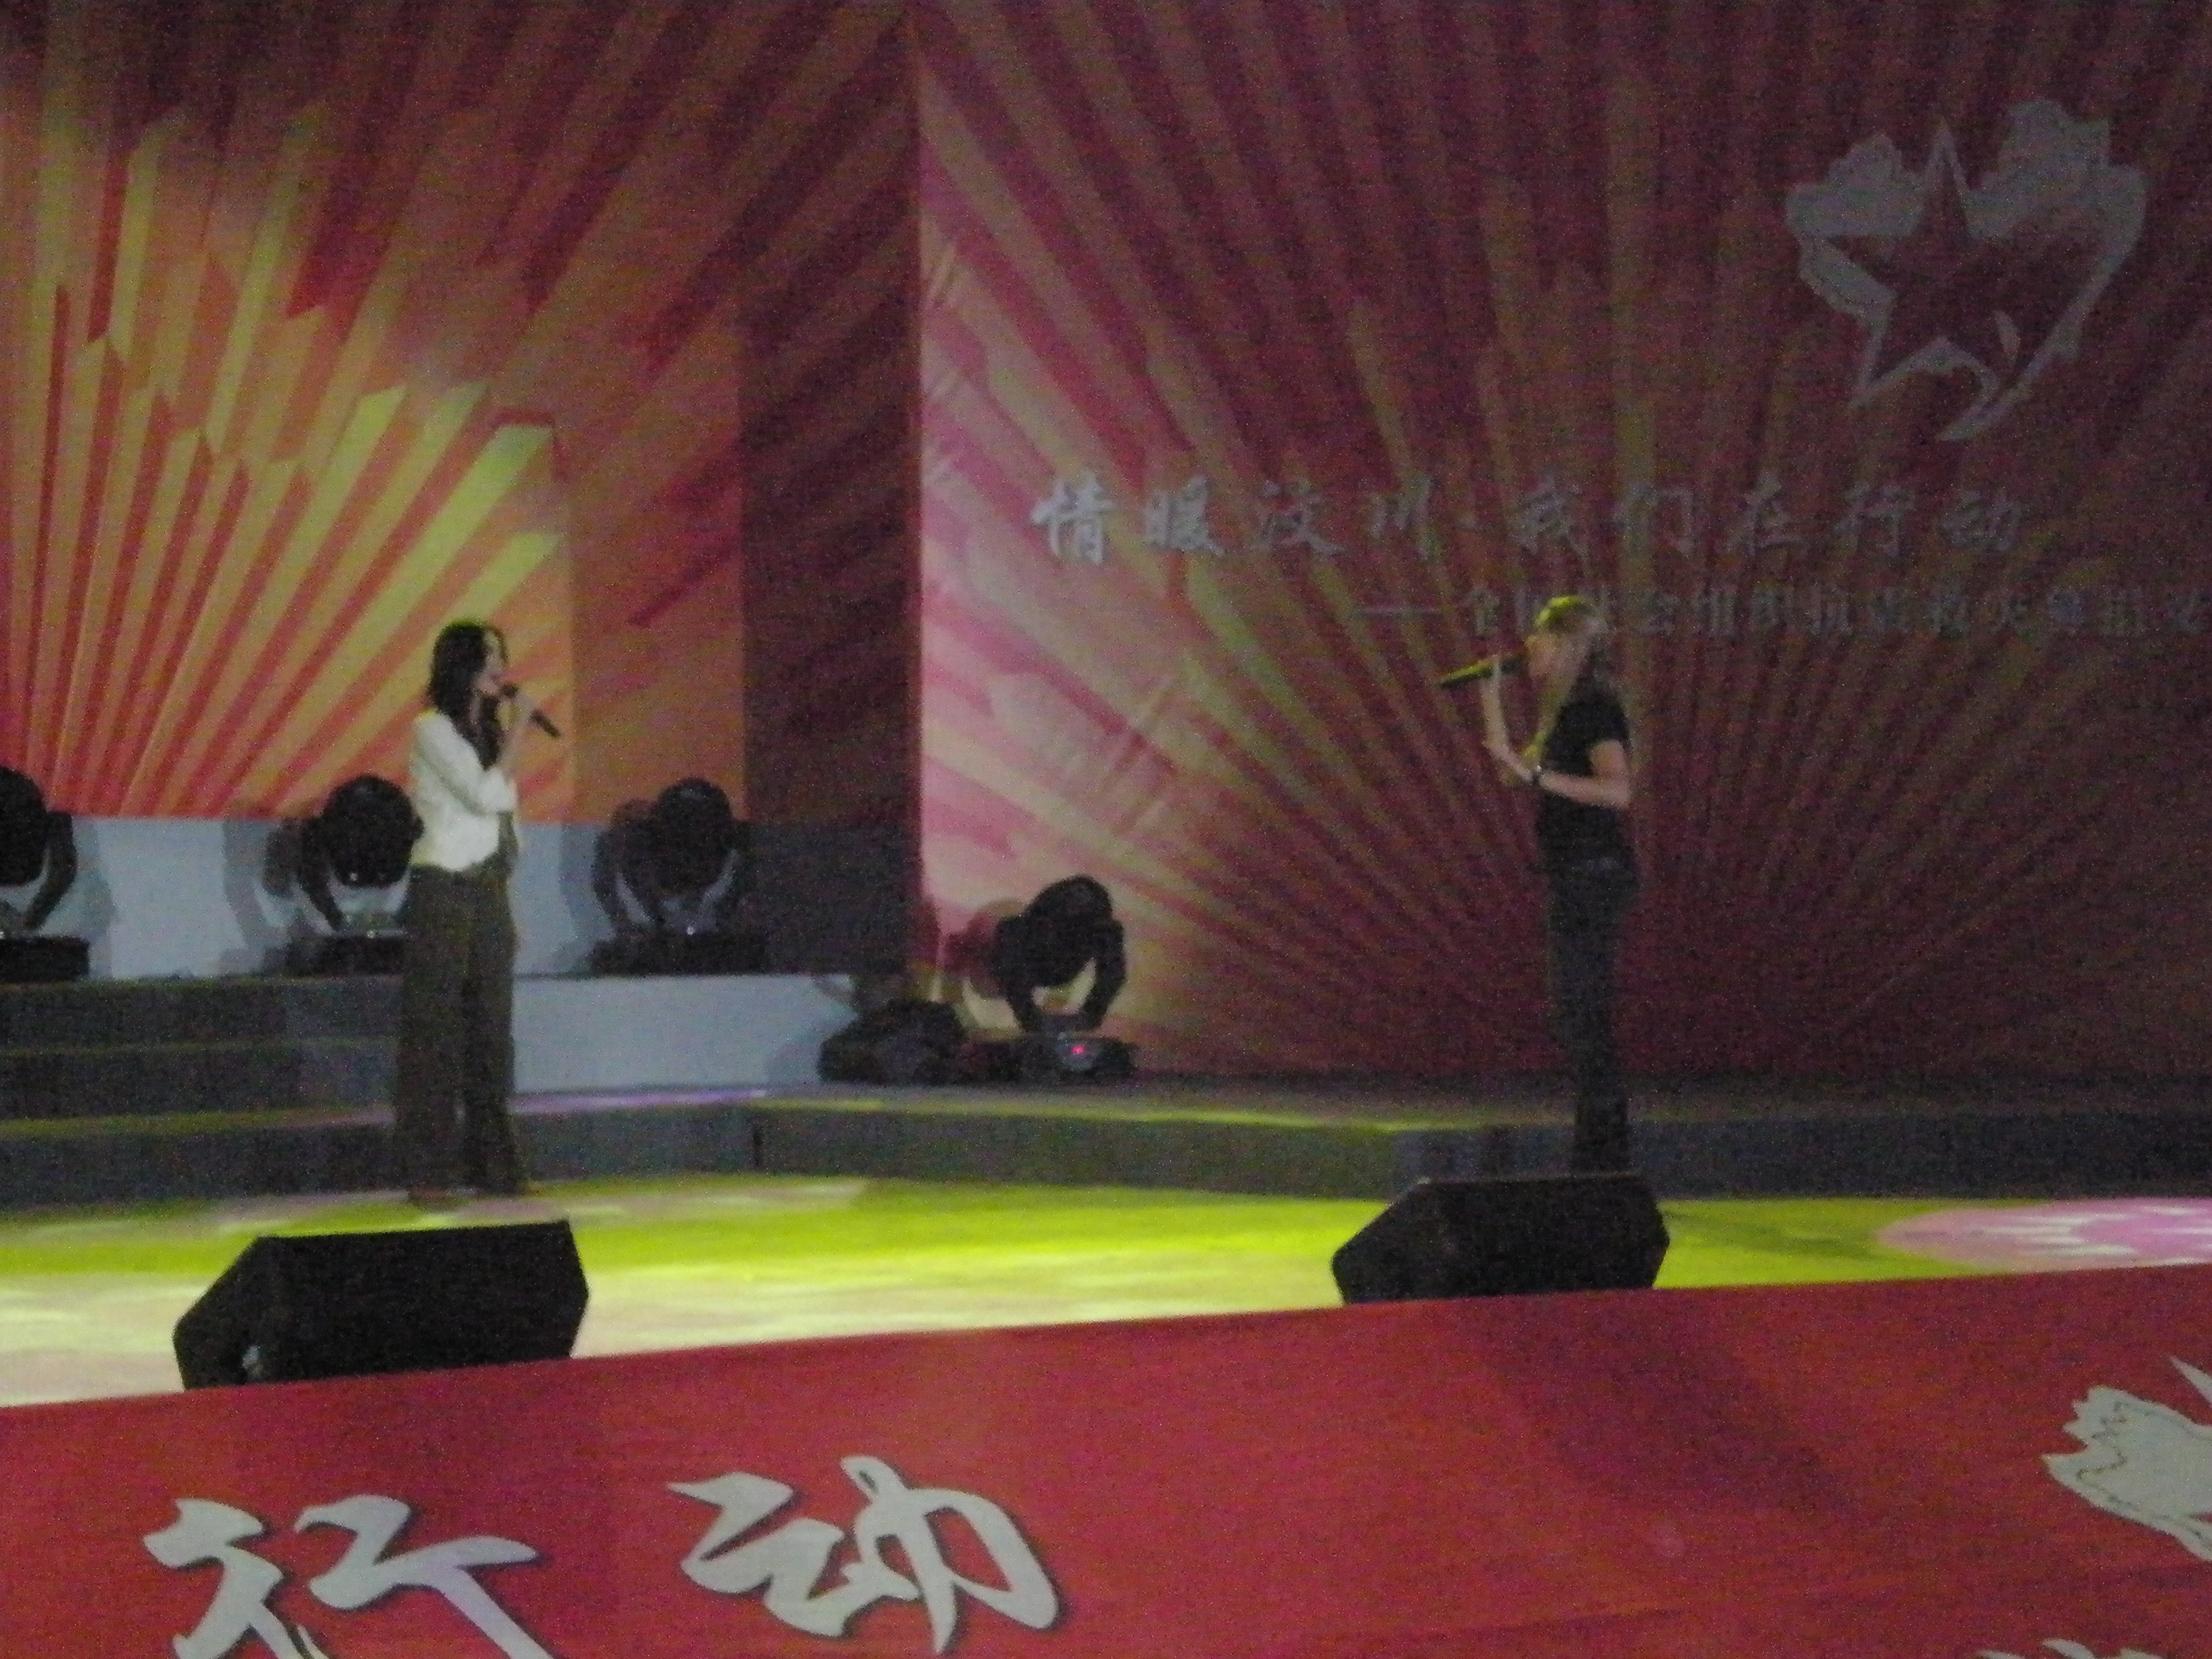 Lauren performing Stand Tall at Live Concert in China. Live to 800 Million People